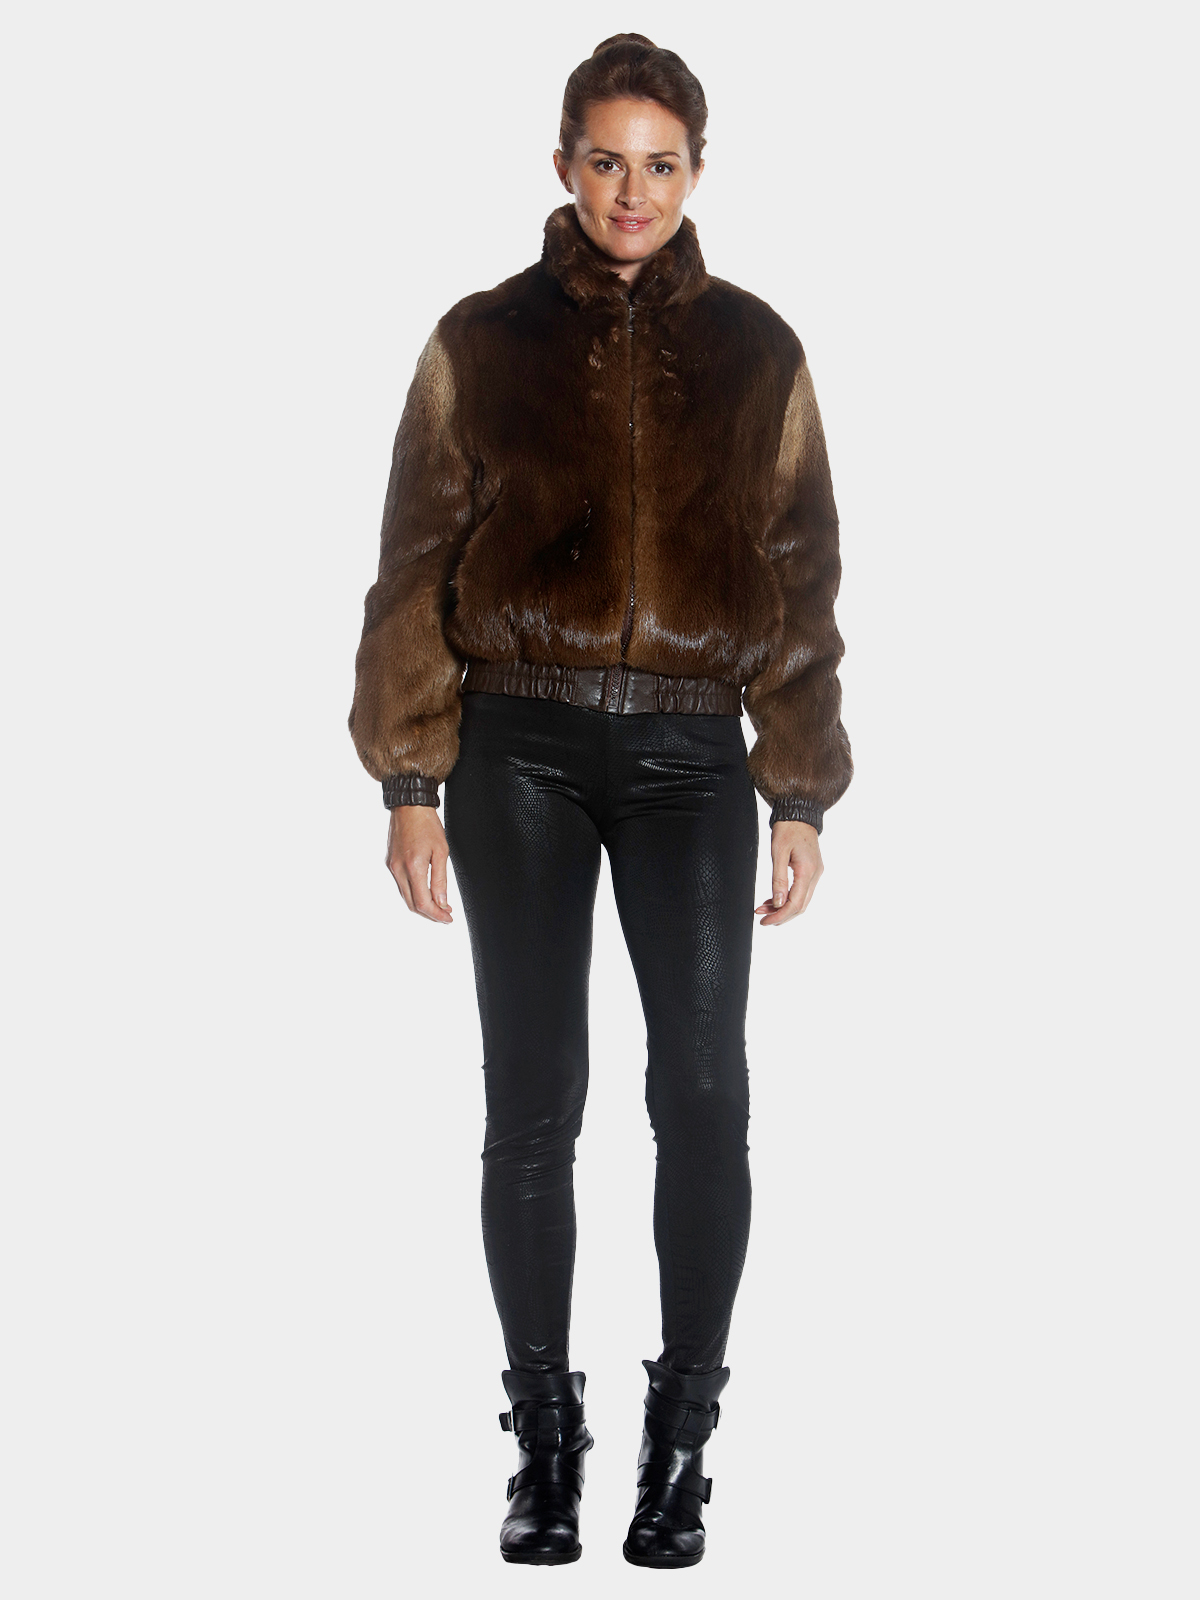 Day Furs Inc. Man's Medium Tone Long Hair Beaver Fur Jacket with Zip Out Leather Sleeves